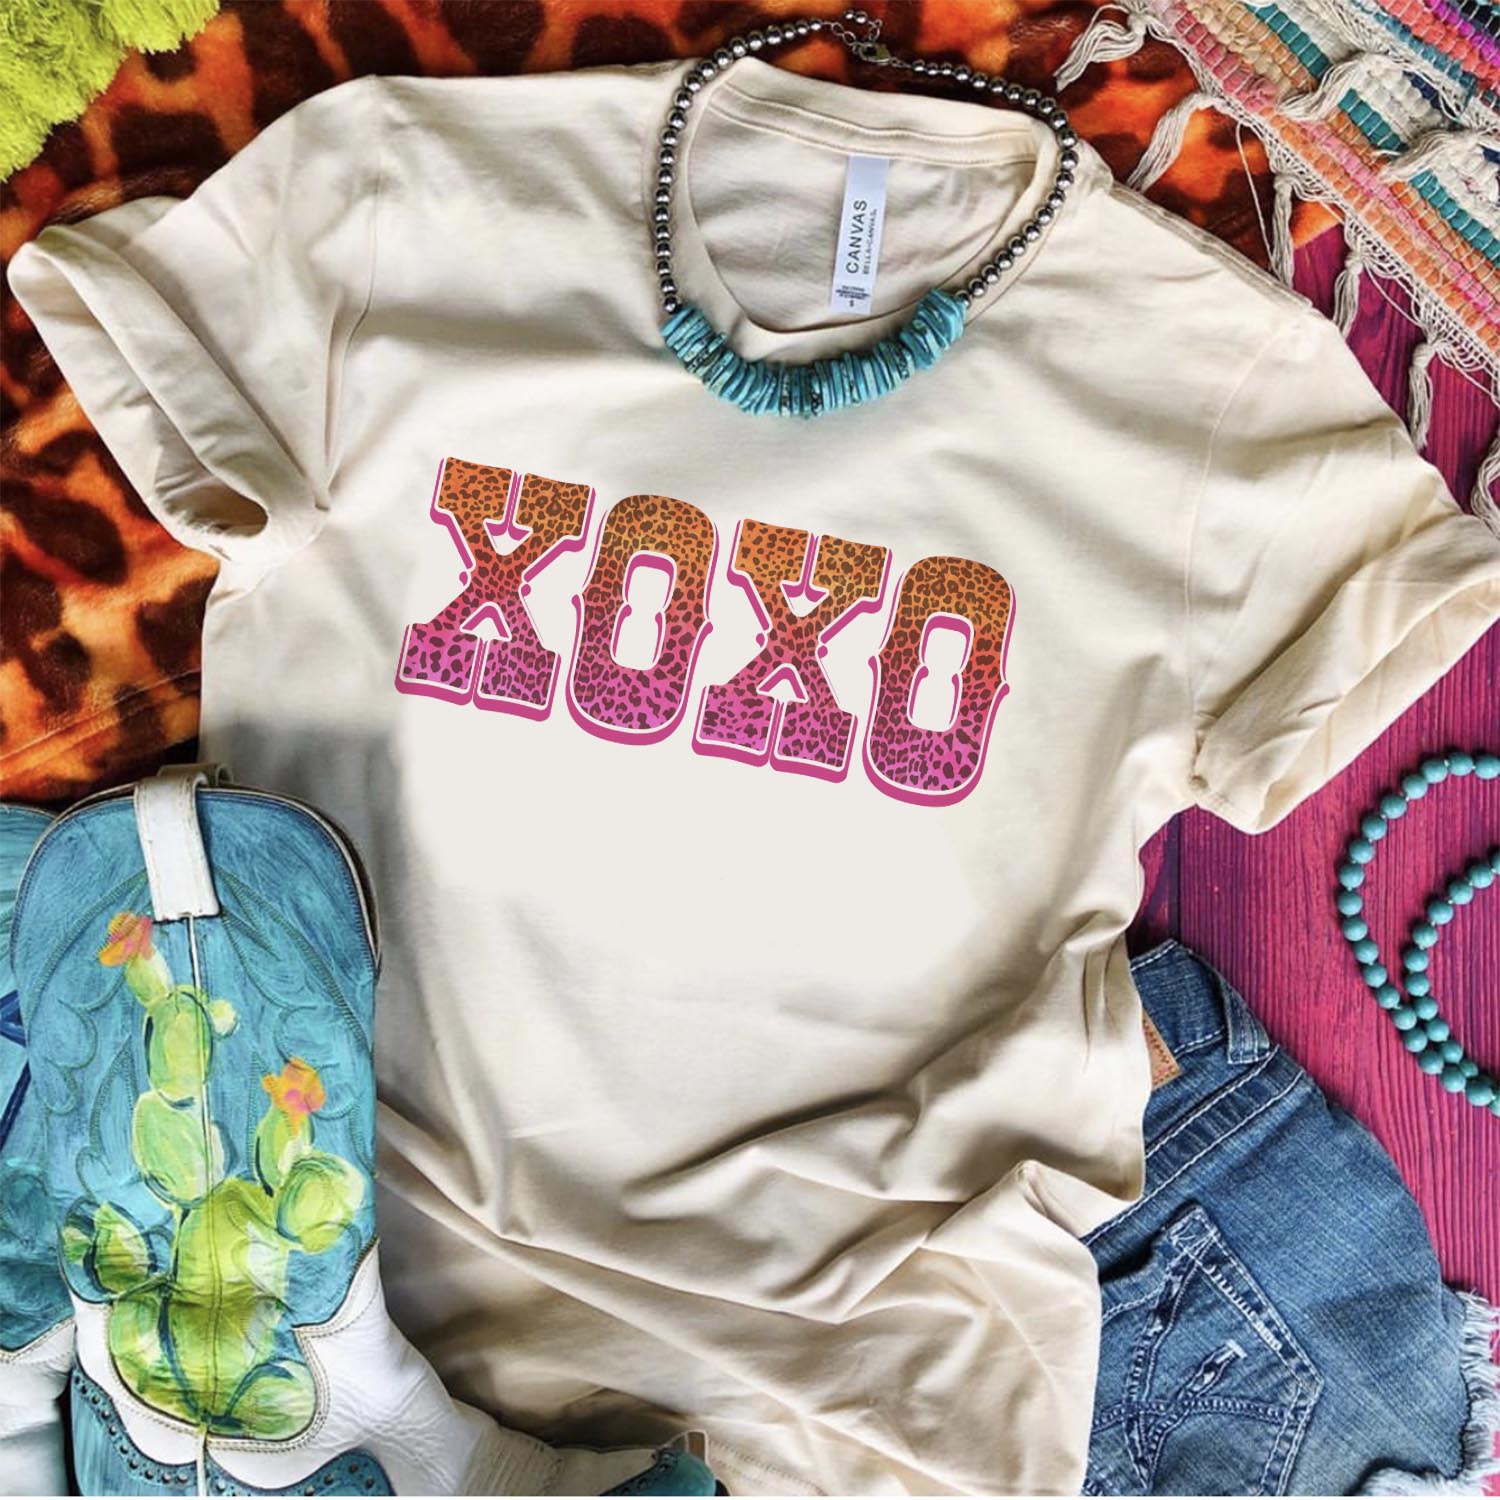 An ivory tee shirt laid on a purple wooden background with cowgirl boots, denim shorts, turquoise and silver necklace, and mix print rugs. The tee shirt has a graphic that says "XOXO" in an ombre leopard print.